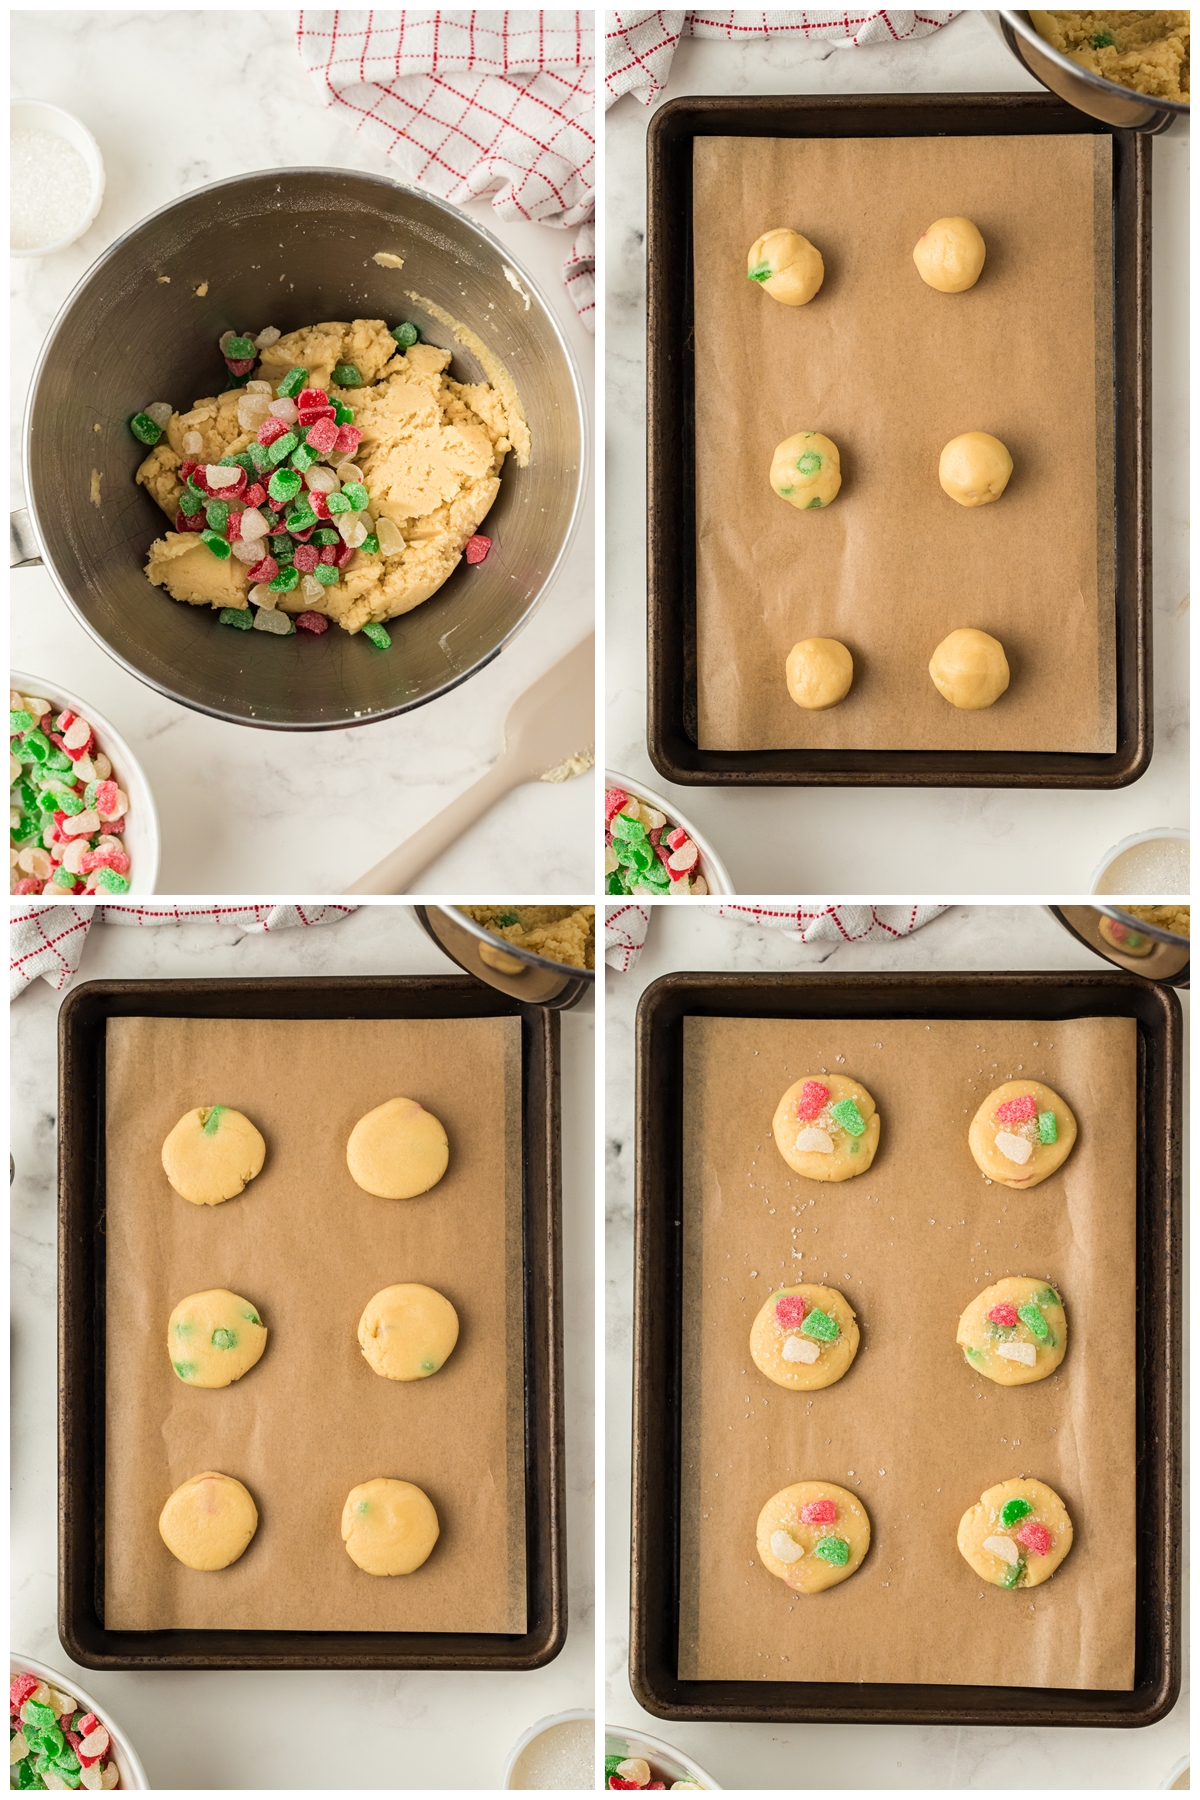 Continuation of the process on how to prepare gum drop cookie. Adding quartered gum drops into the mixture and placing them into a tray for baking. 